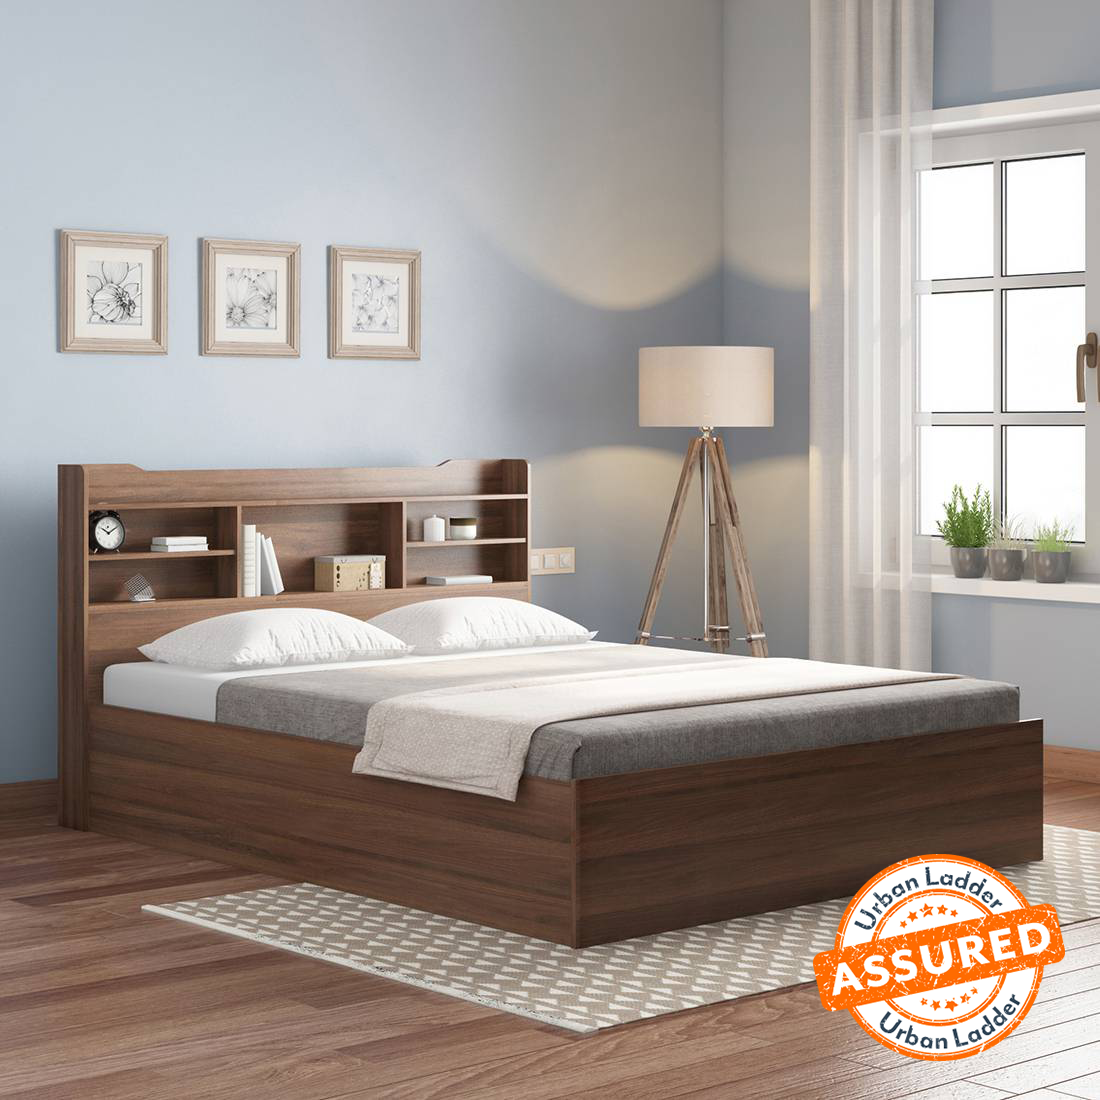 Up to 70% on 700+ Modern Bed Designs | Full House Sale - Urban Ladder